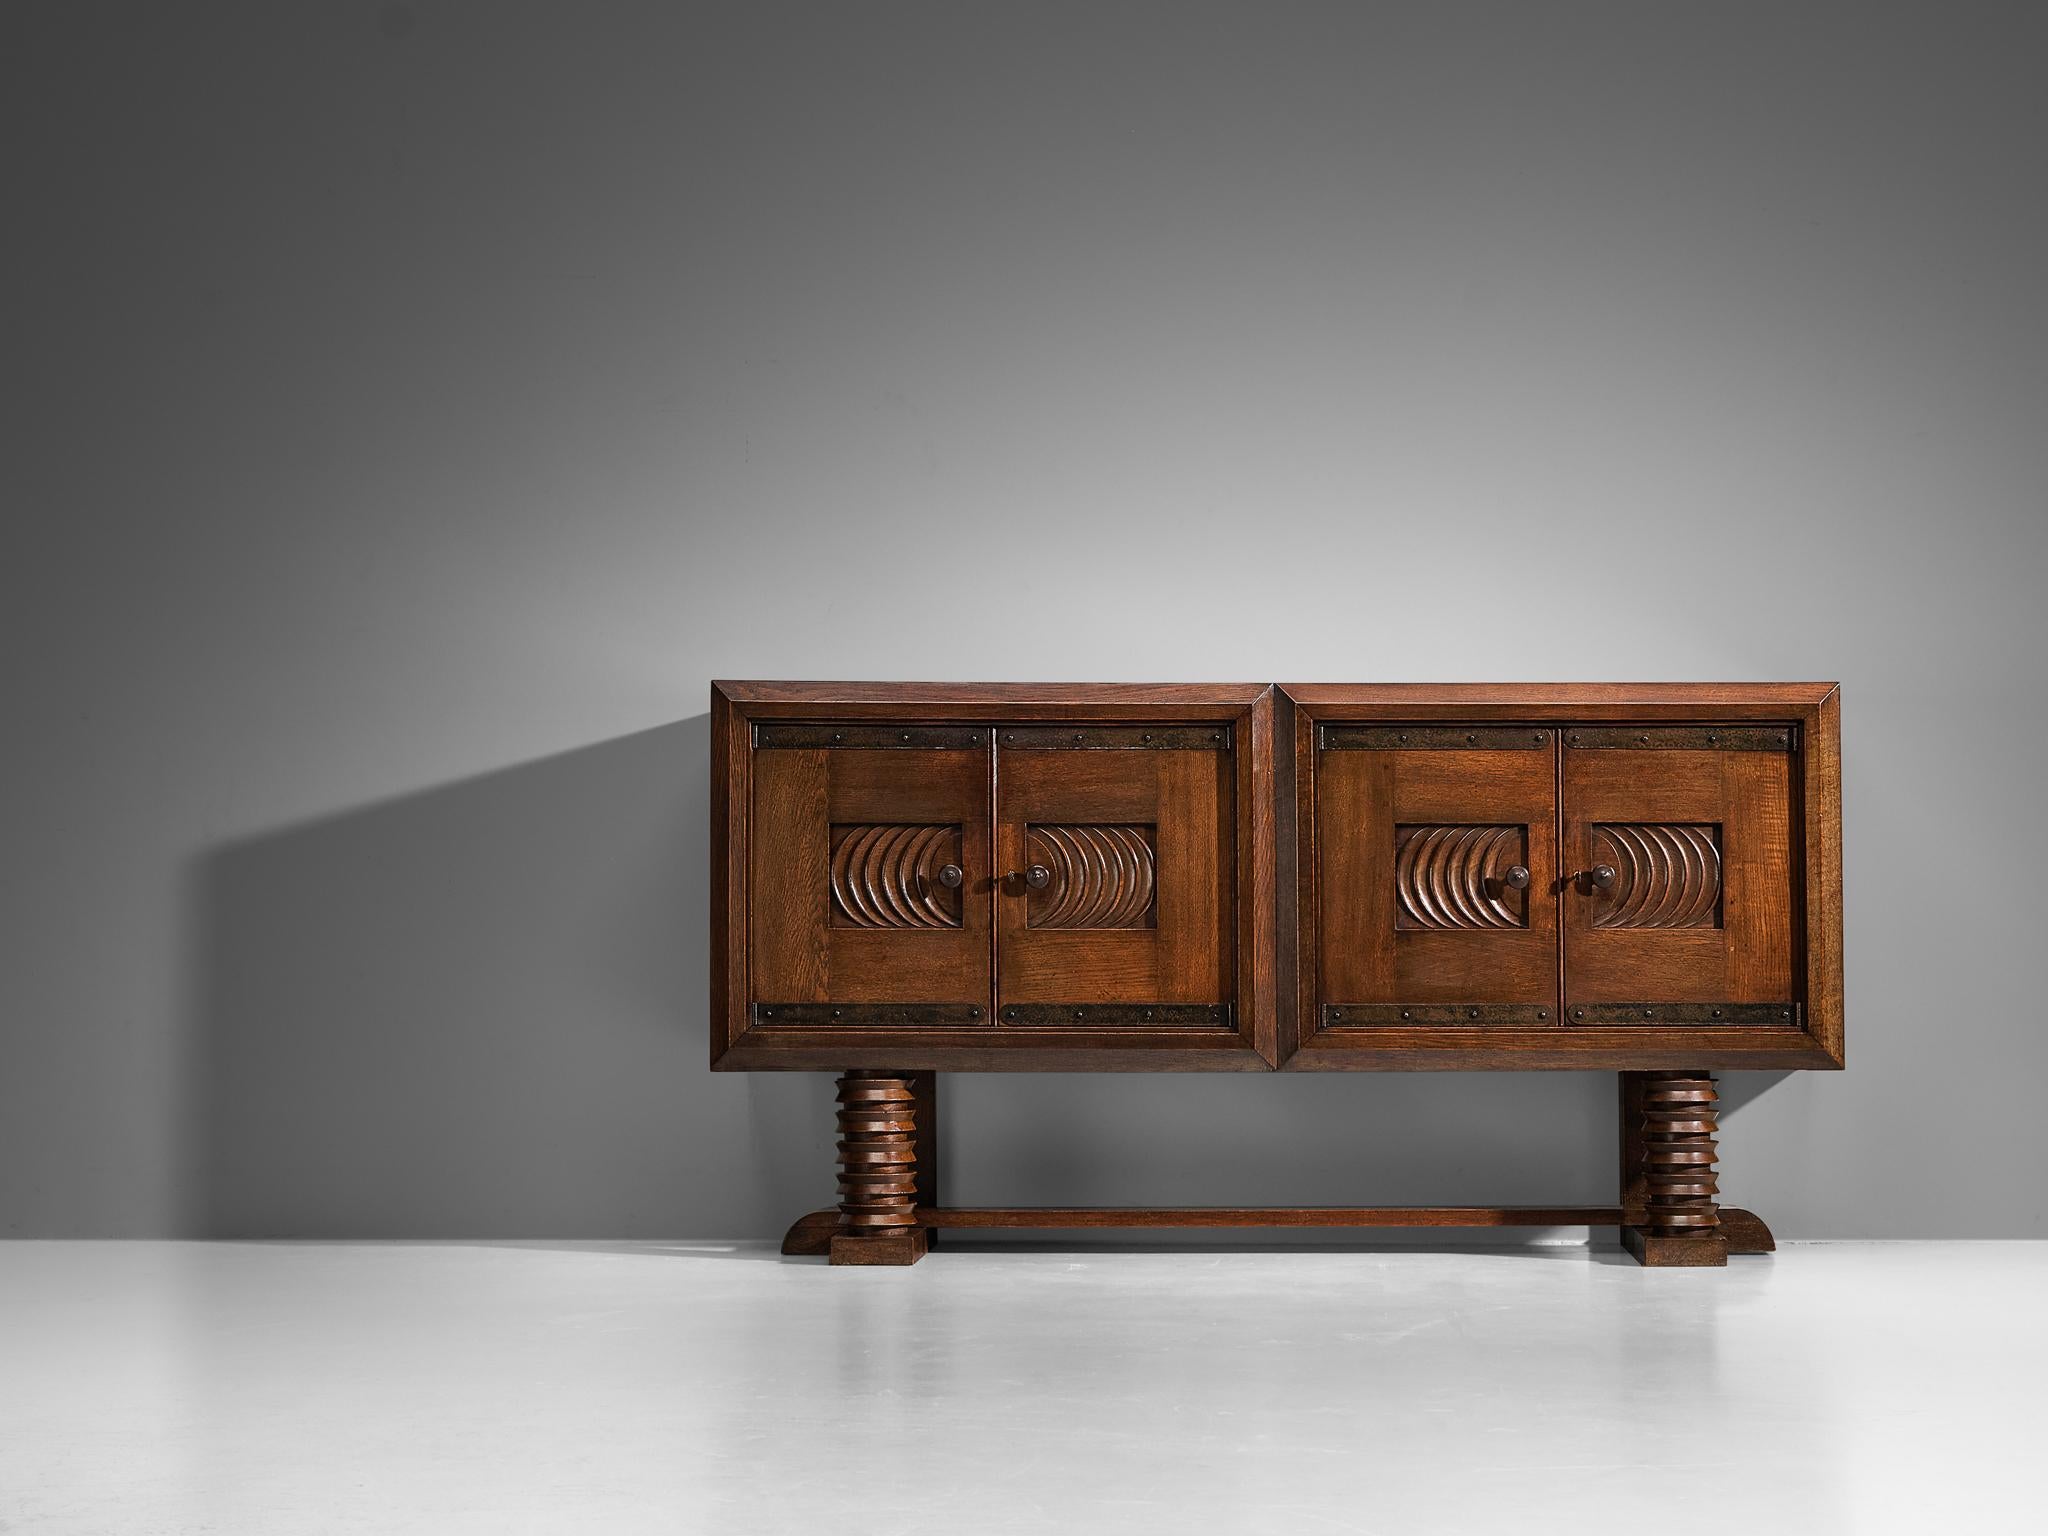 French  Parisian Art Deco Sideboard in Solid Oak with Iron Elements For Sale